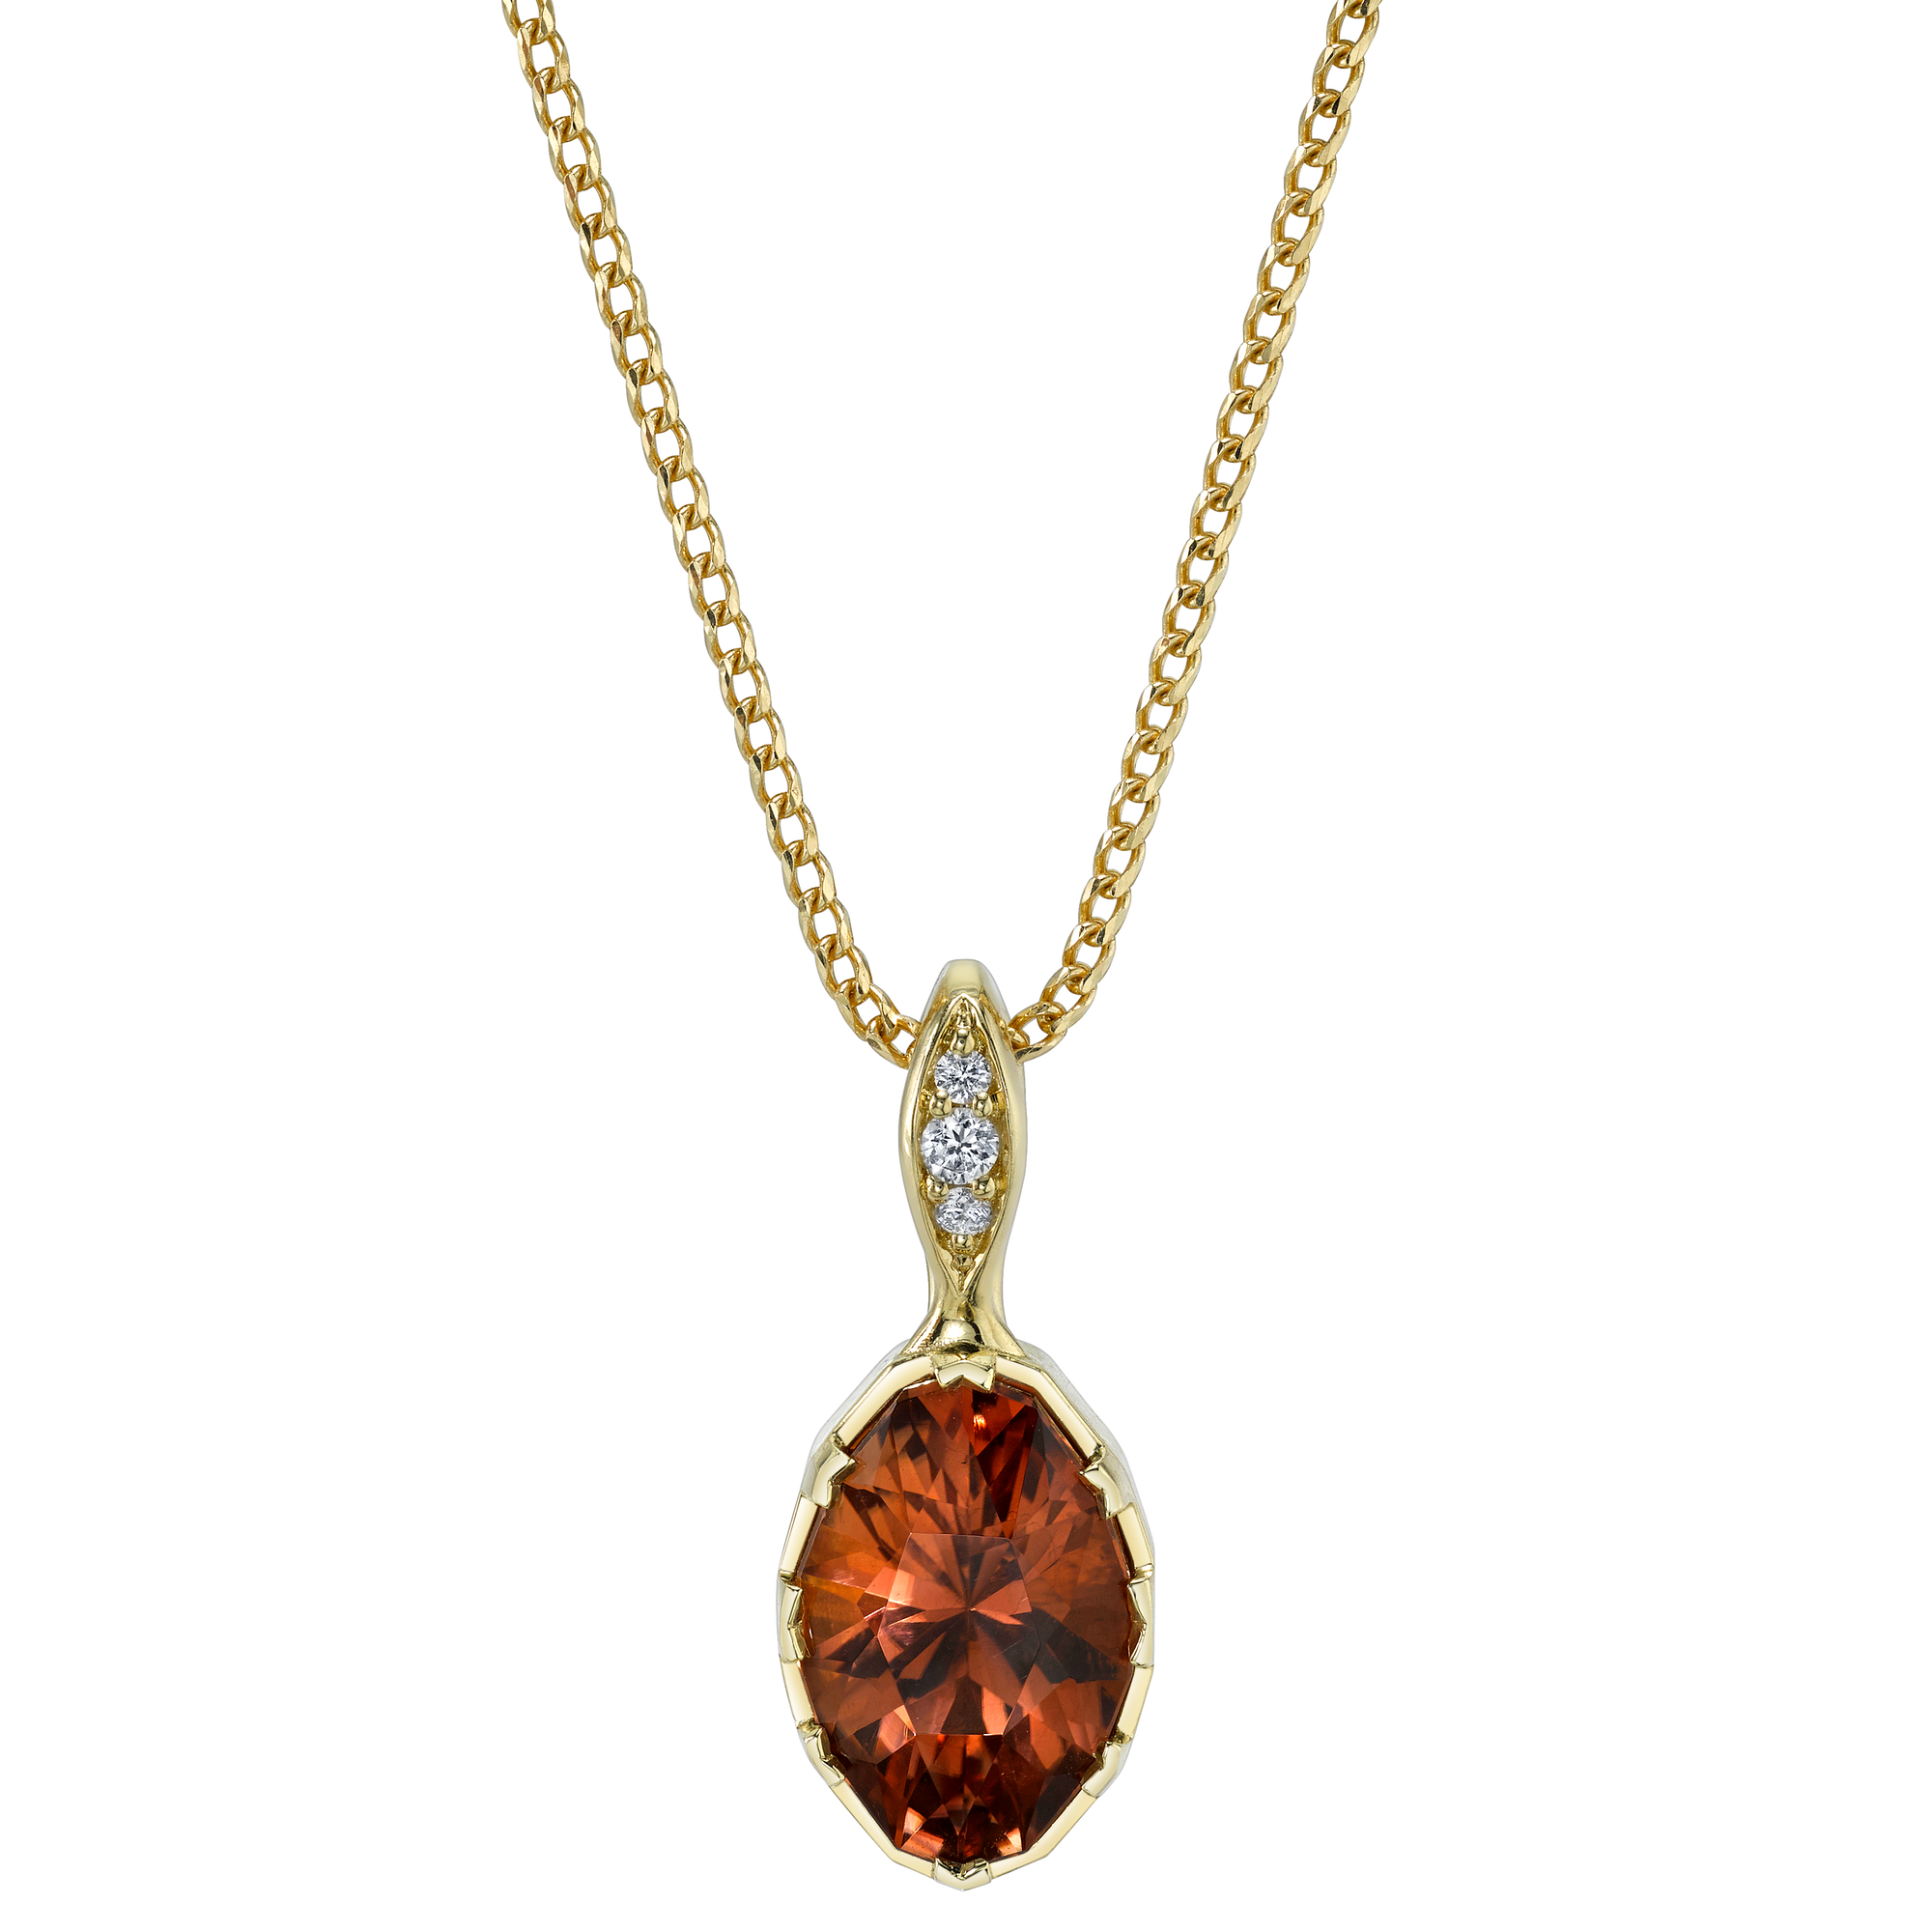 Genesis Necklace featuring a Tourmaline with Diamond Pave